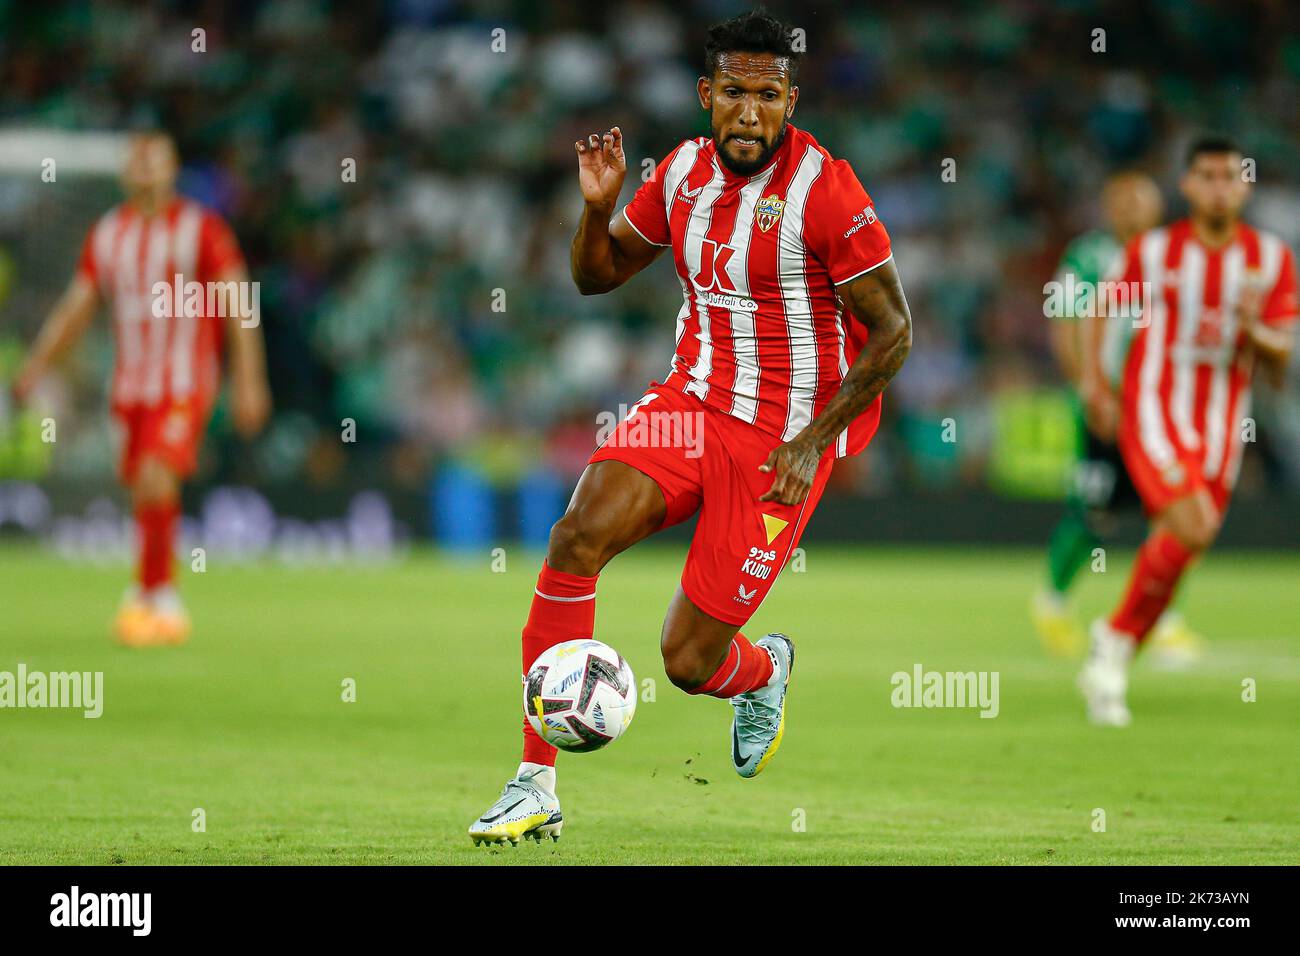 Sevilla, Spain. October 16, 2022, Dyego Sousa of UD Almeria  during the La Liga match between Real Betis and UD Almeria played at Benito Villamarin Stadium on October 16, 2022 in Sevilla, Spain. (Photo by Antonio Pozo / PRESSIN) Stock Photo